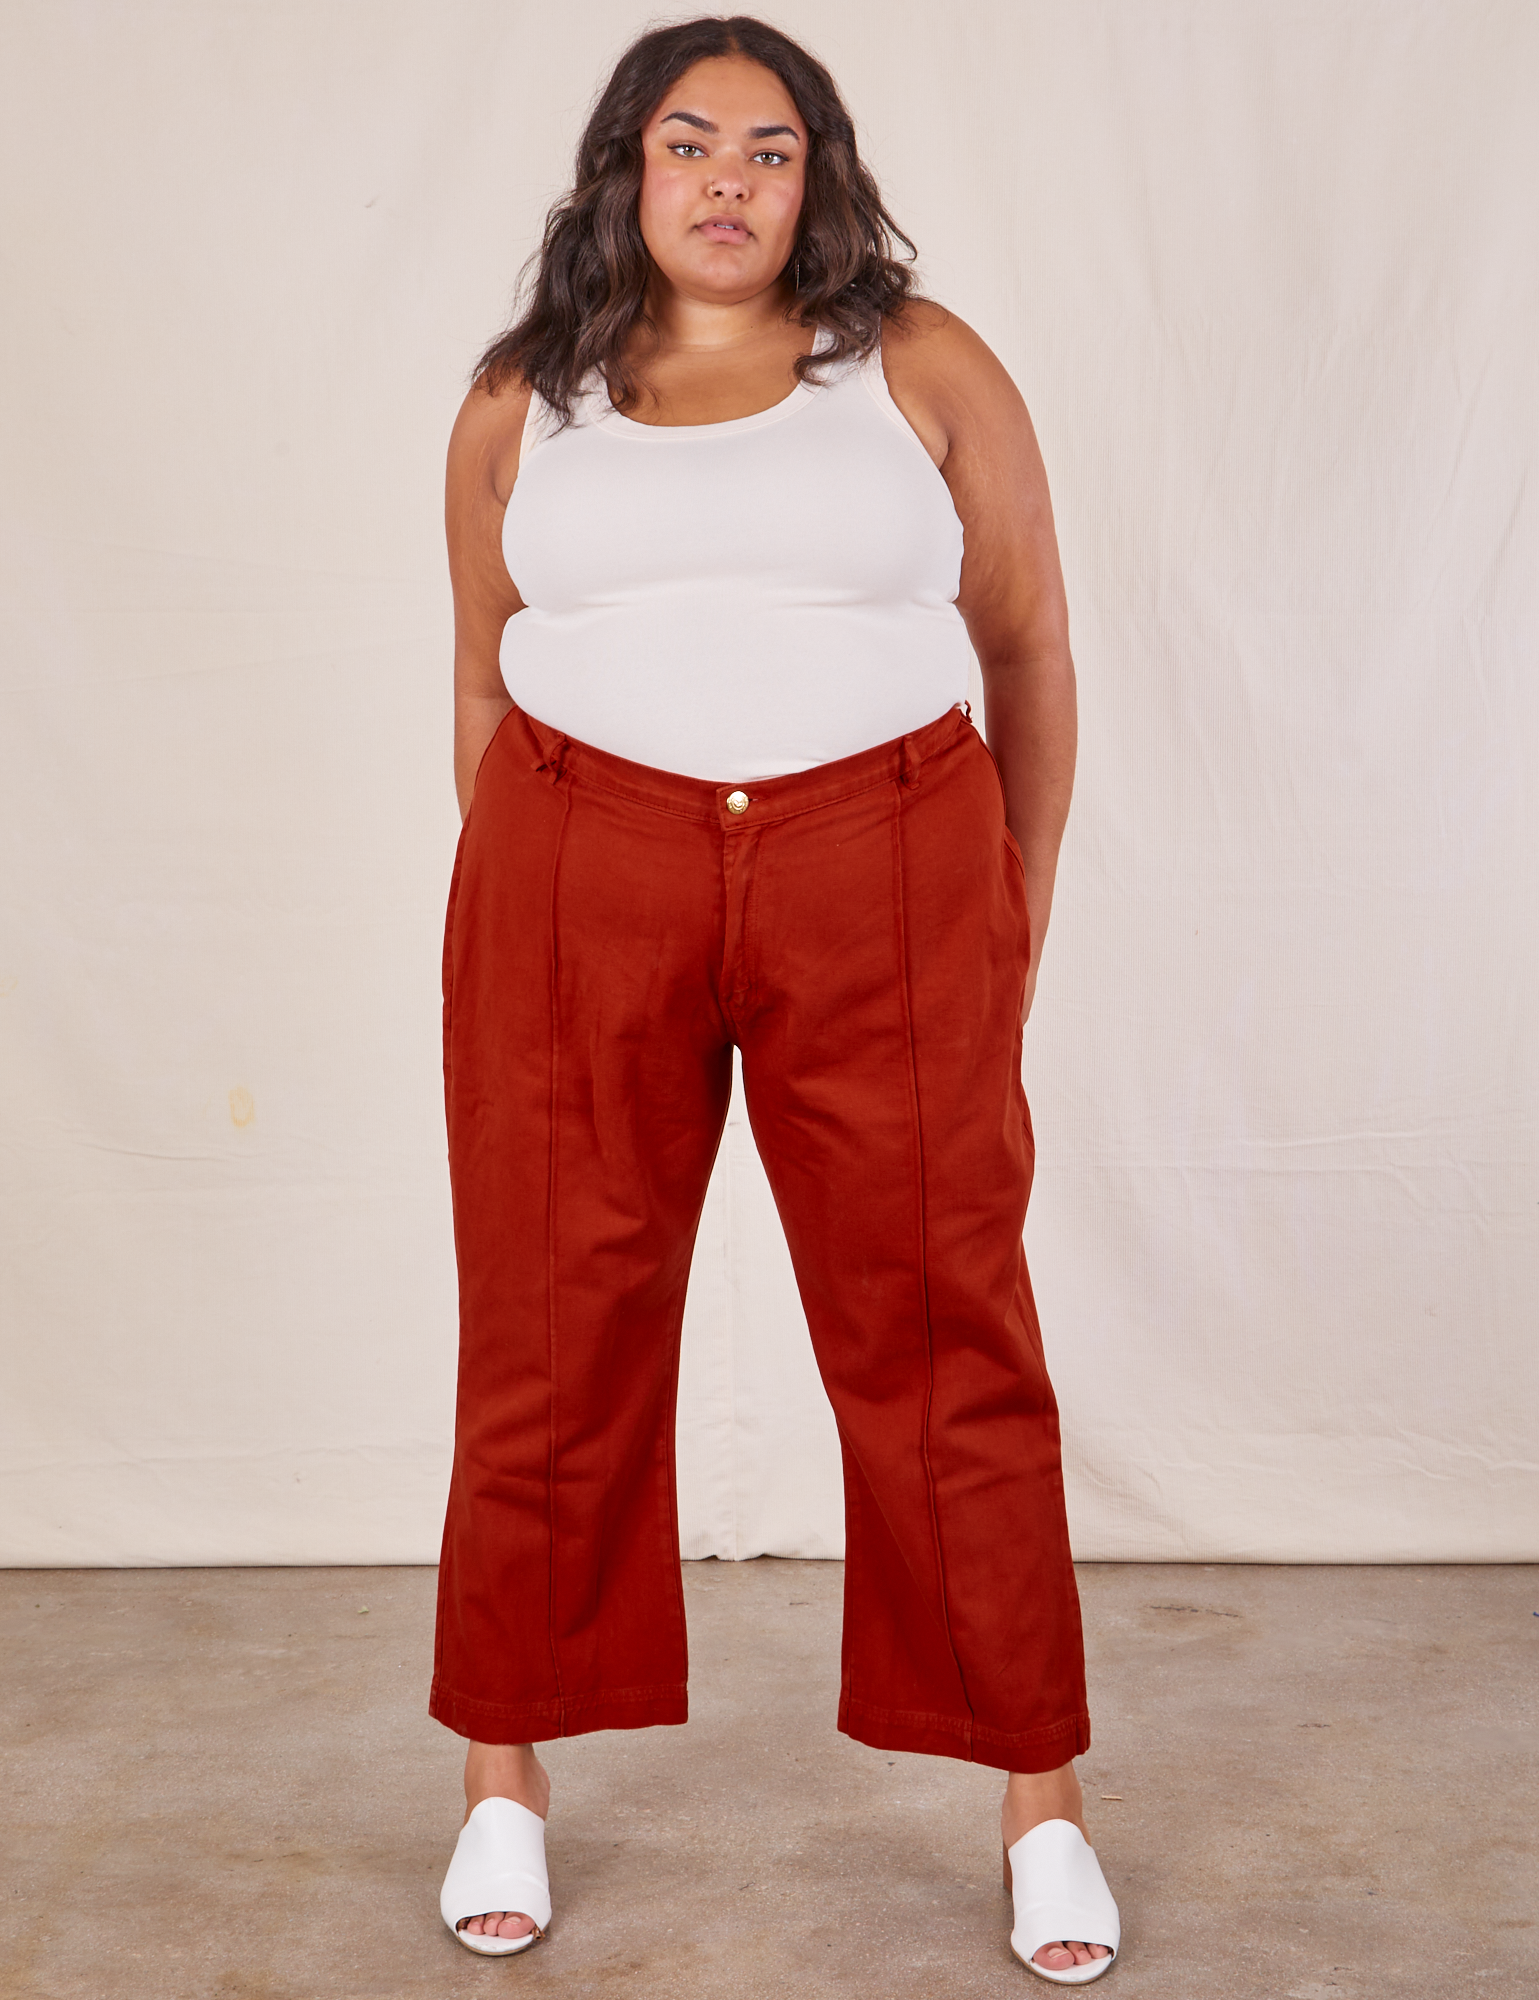 Alicia is wearing Western Pants in Paprika and a Tank Top in vintage tee off-white